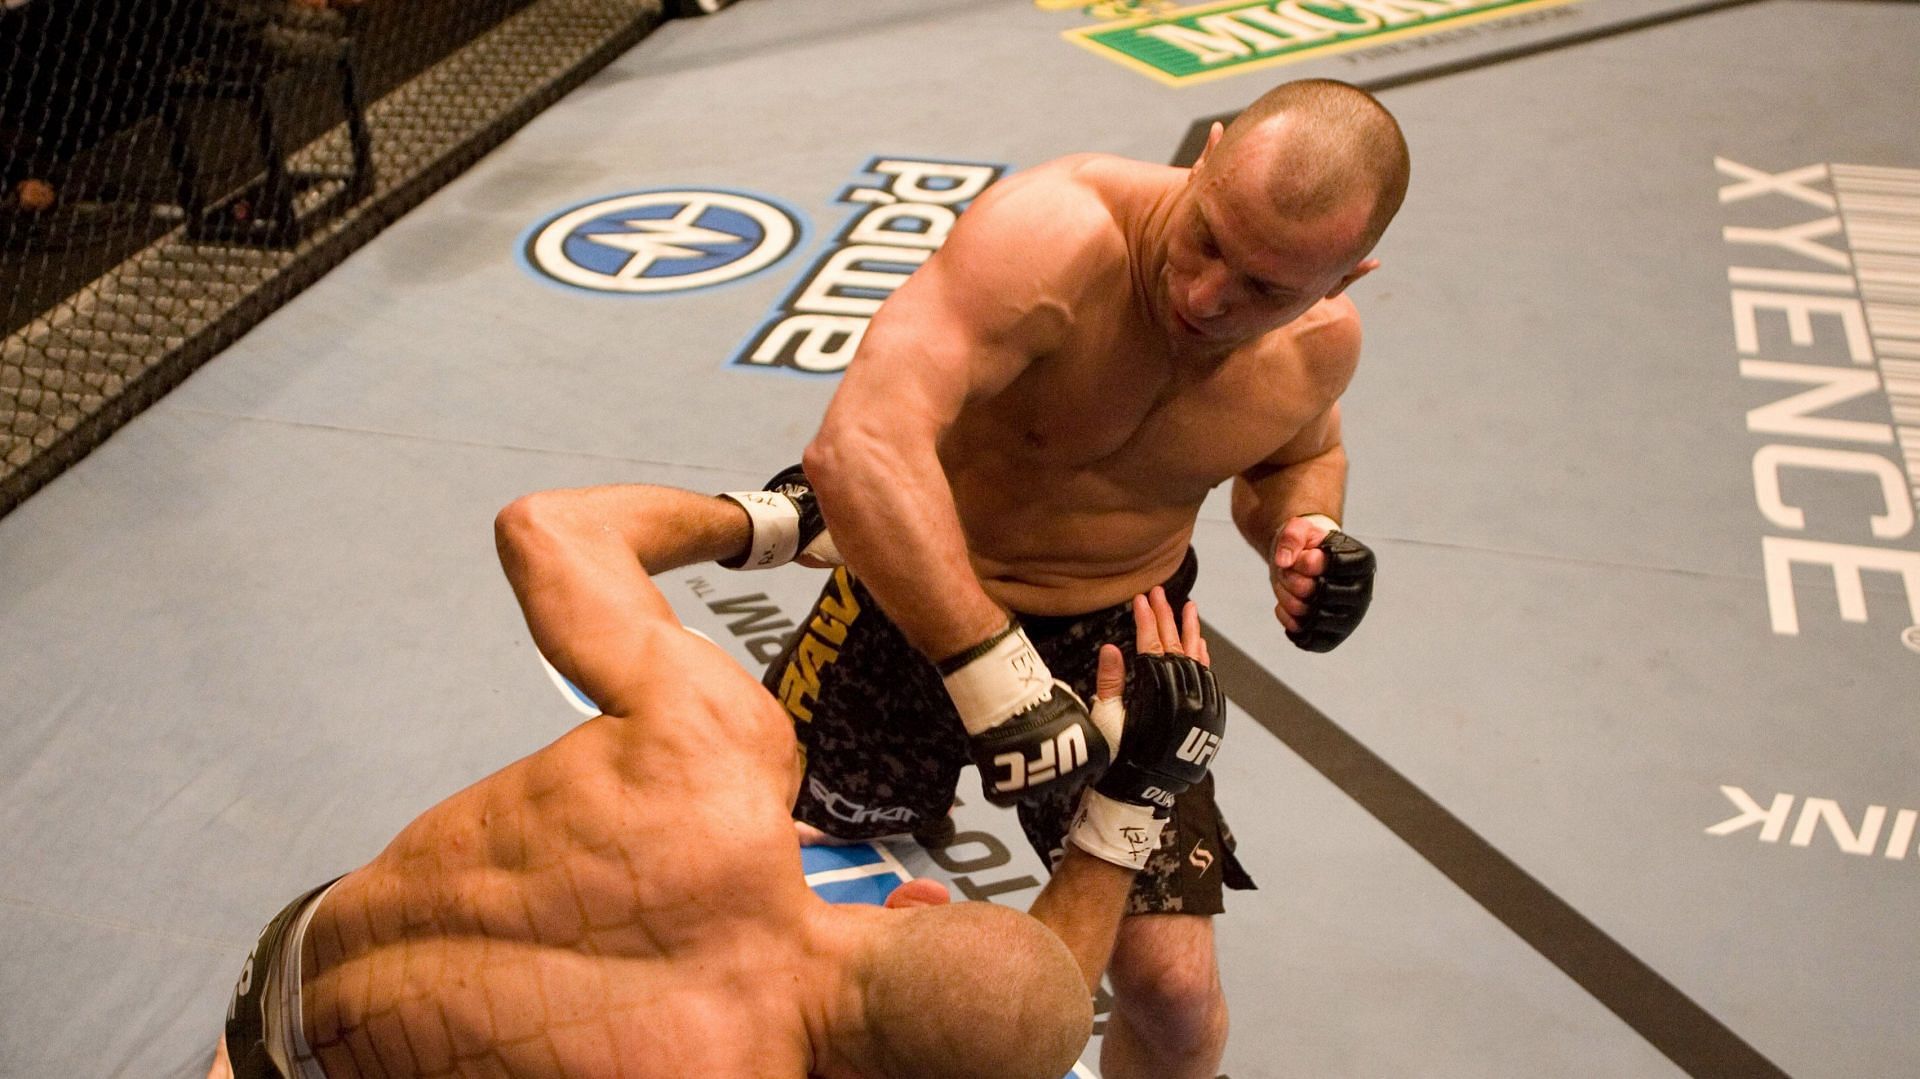 Matt Serra pulled off one of the all-time great upsets when he knocked out Georges St-Pierre to claim welterweight gold